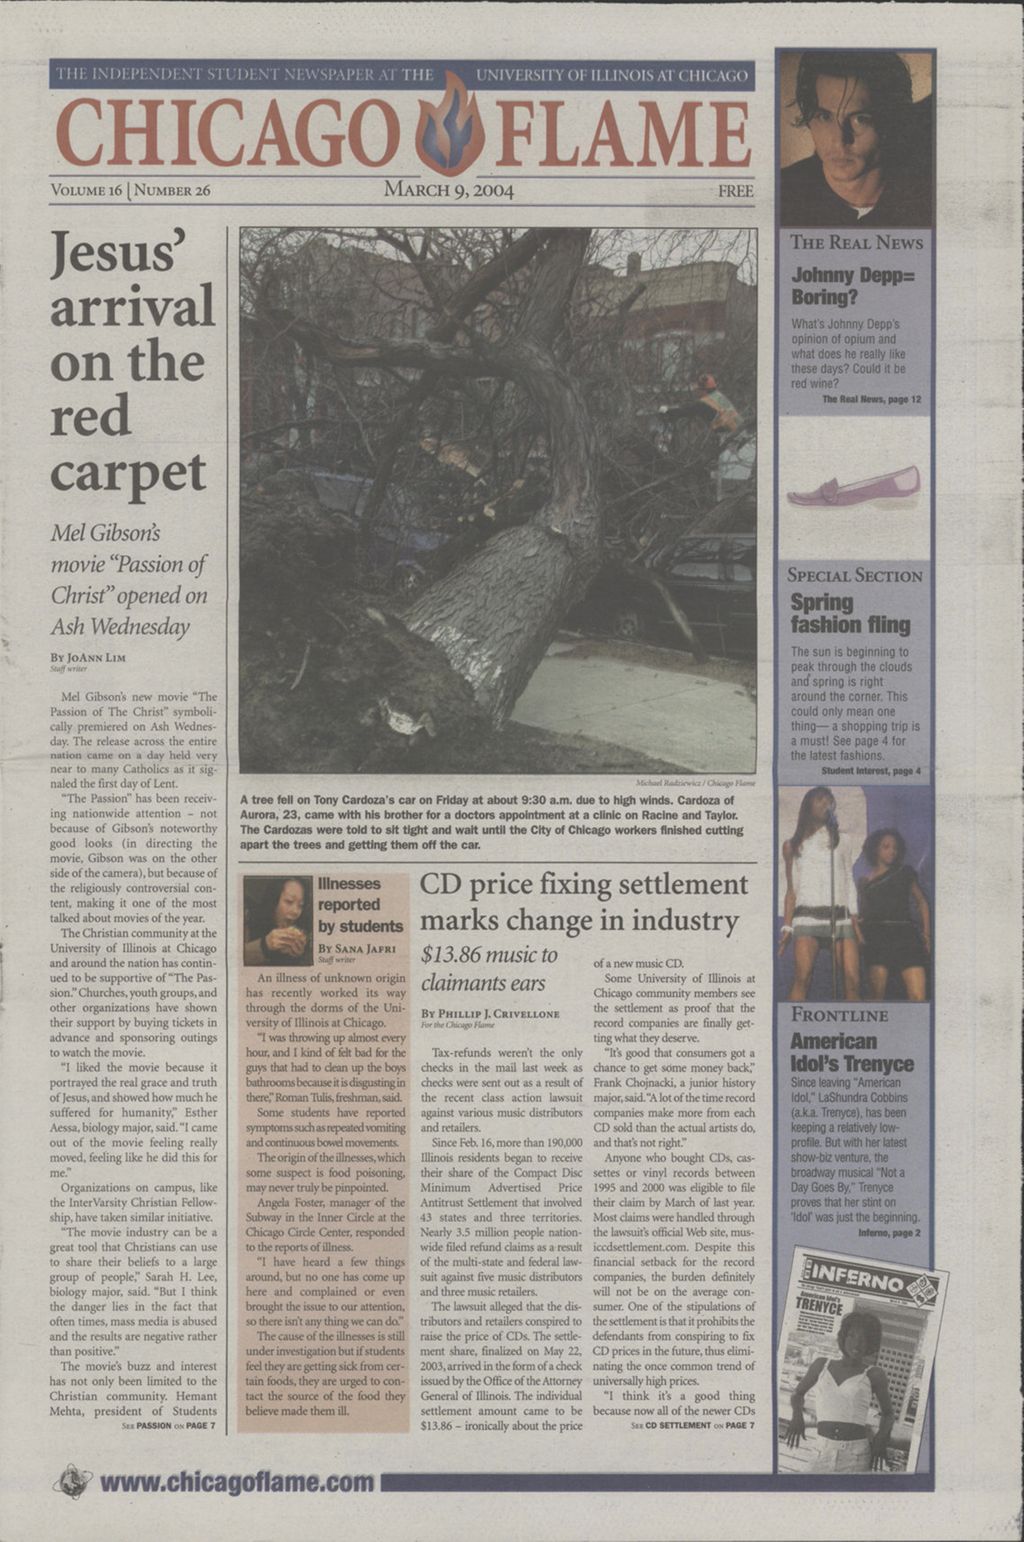 Chicago Flame (March 9, 2004)